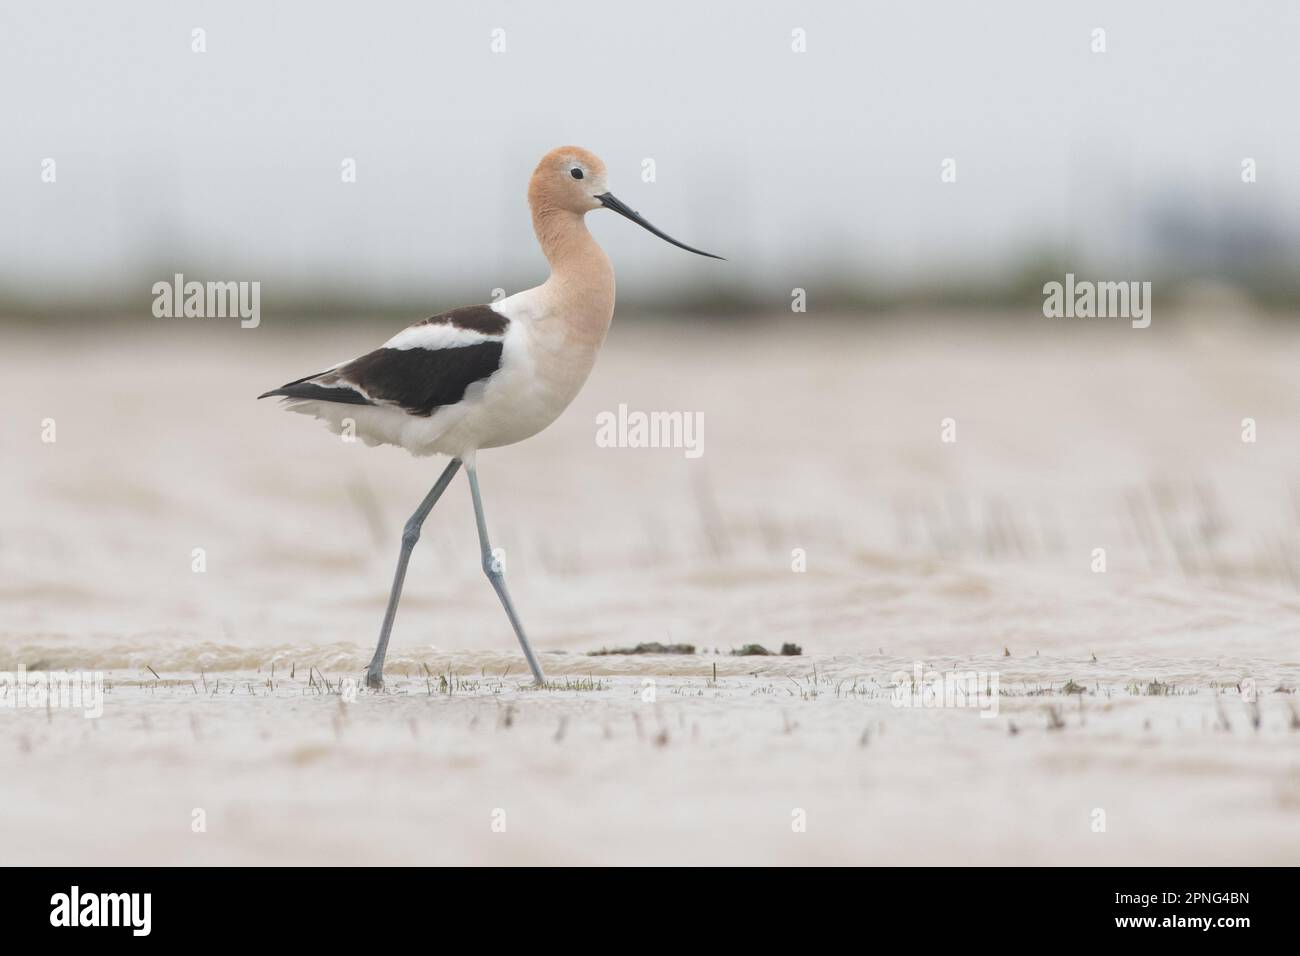 An American avocet, Recurvirostra americana, wading in a seasonal vernal pool in the Central Valley of California. Stock Photo